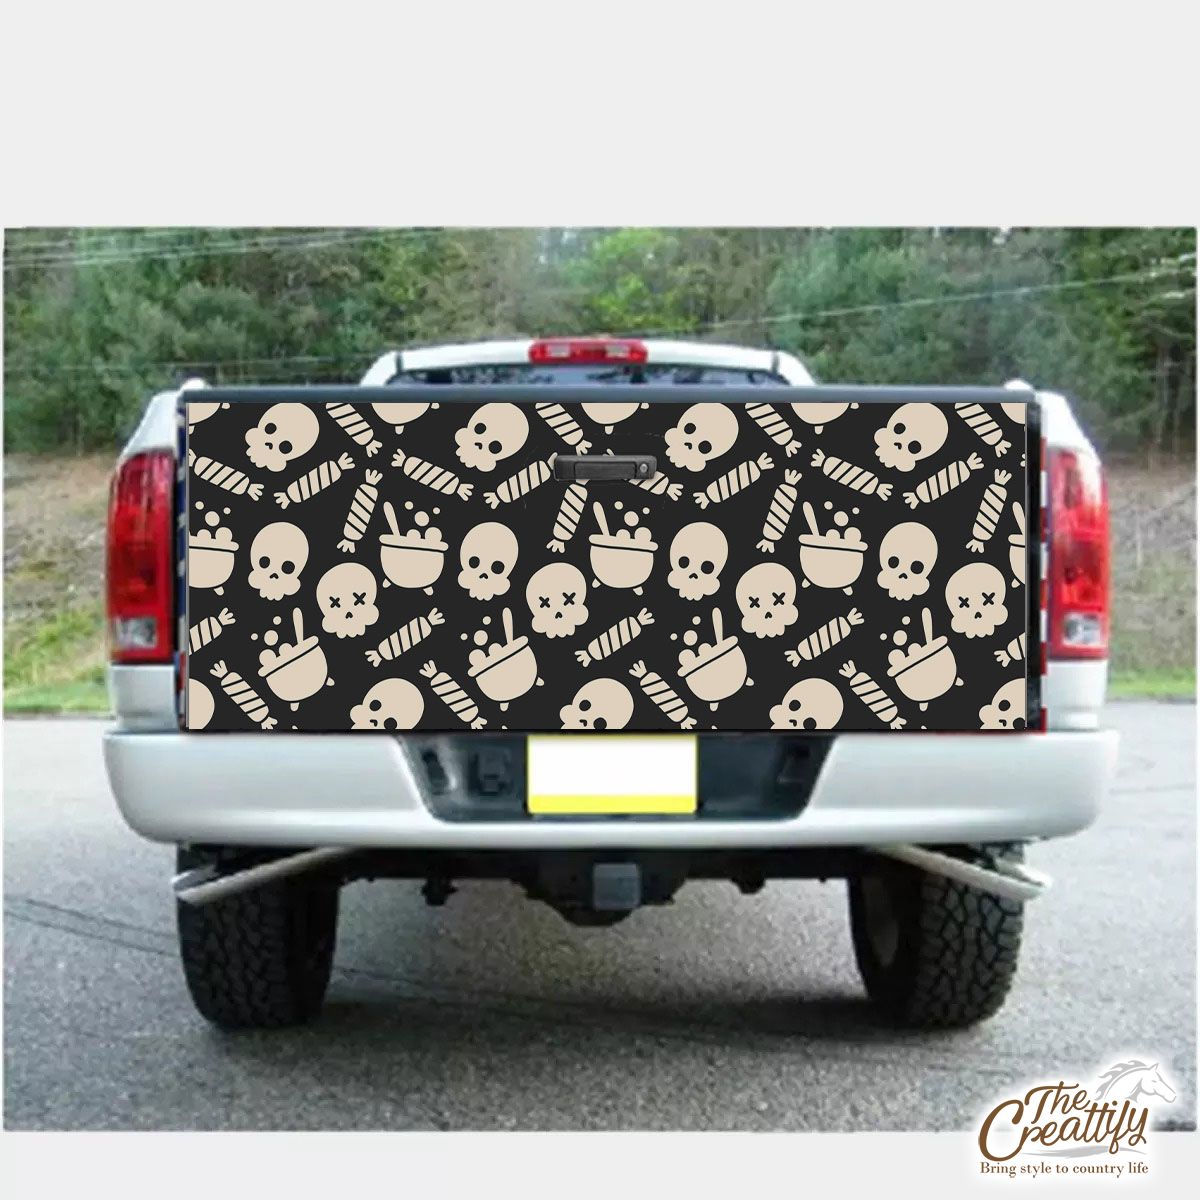 Black And White Skull Emoji With Halloween Candy Truck Bed Decal